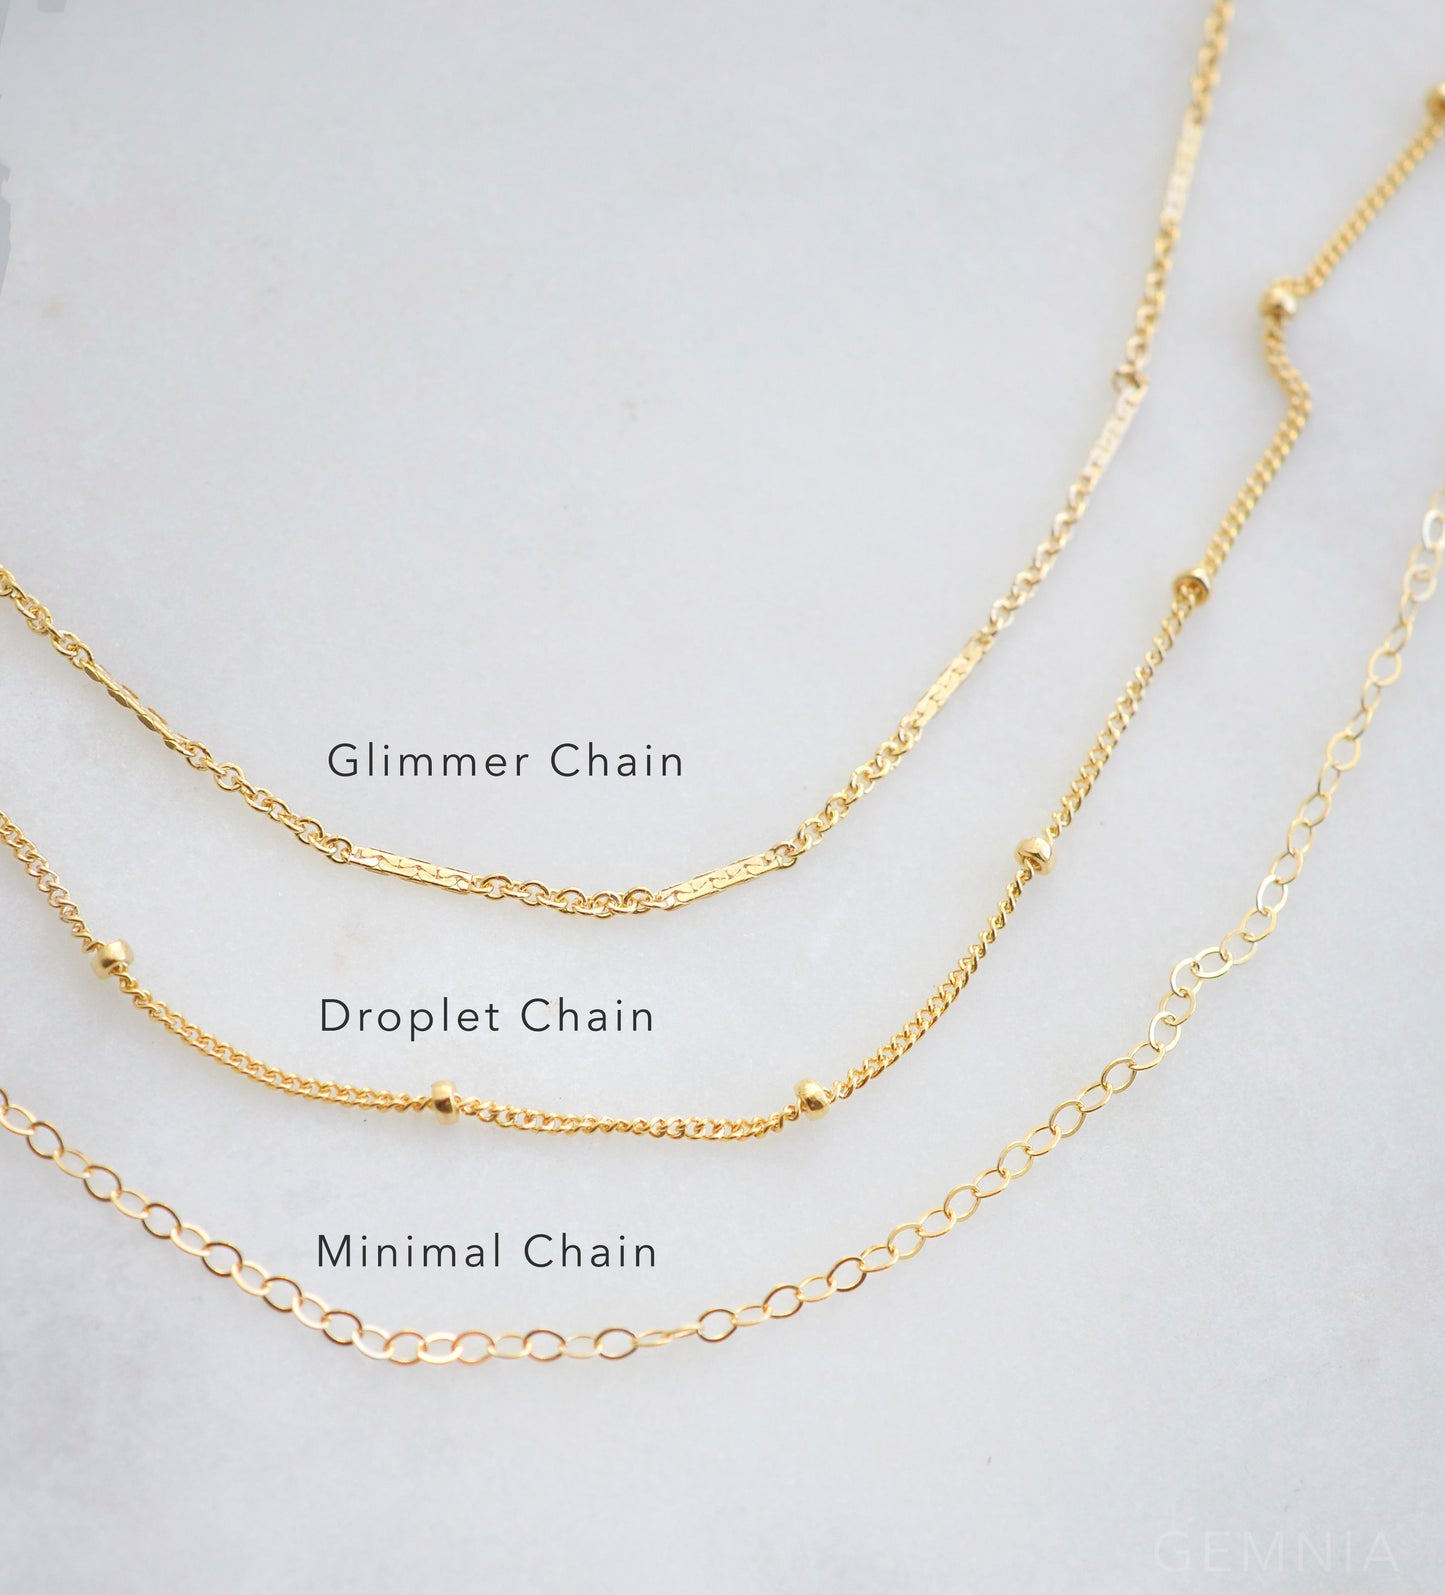 Chain Style Options. The glimmer chain has bar-like sequins. The Droplet Chain has little round beads every inch. The Minimal Chain is a shimmering cable chain.